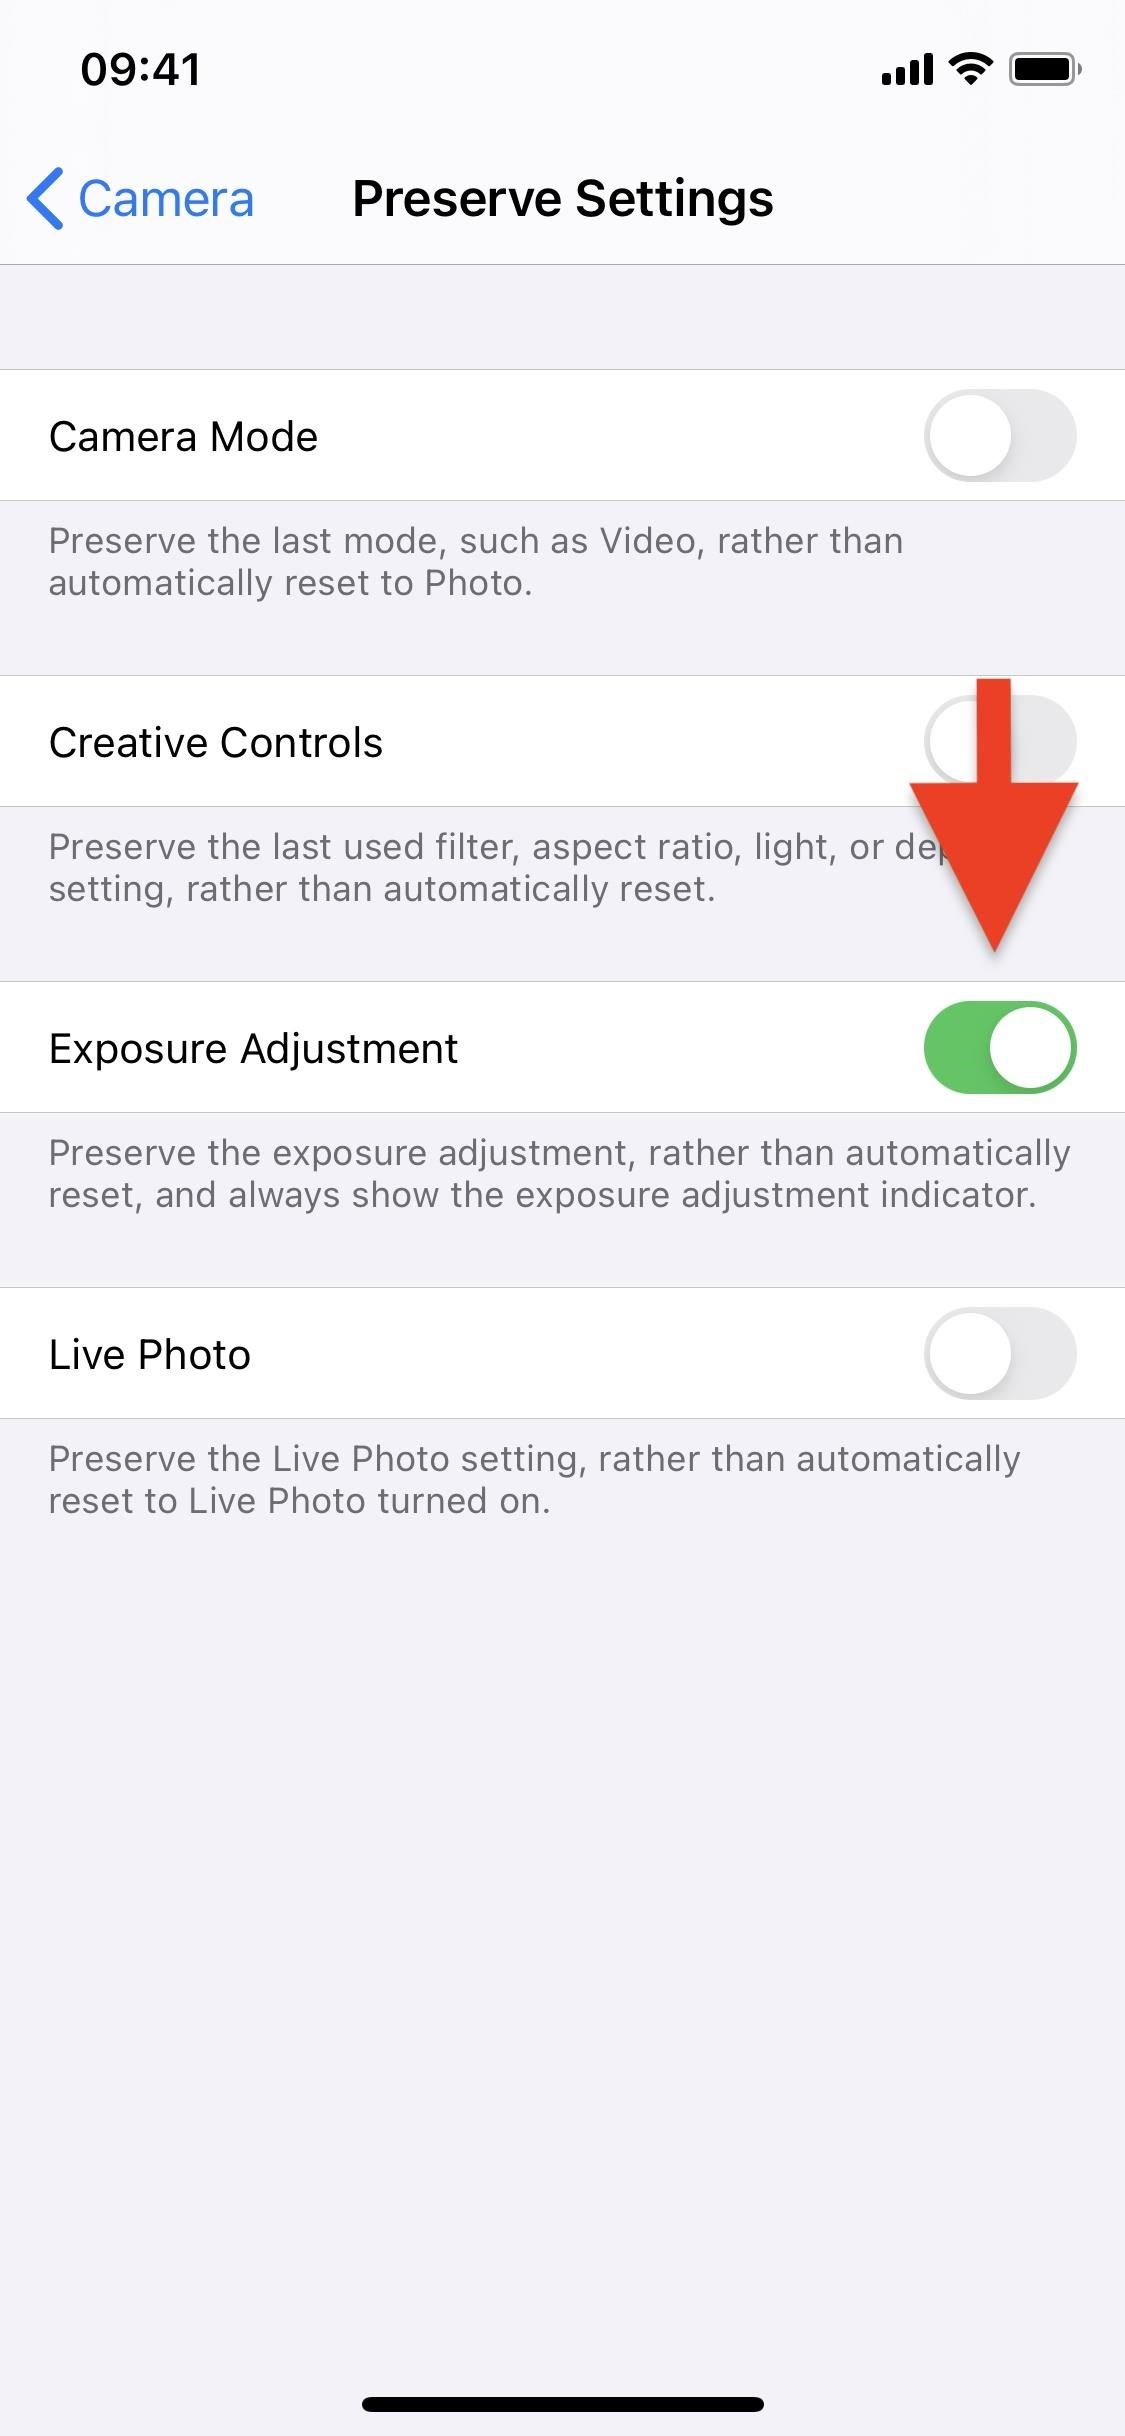 Make Your iPhone's Camera Remember Your Last Used Exposure Compensation Value for Later